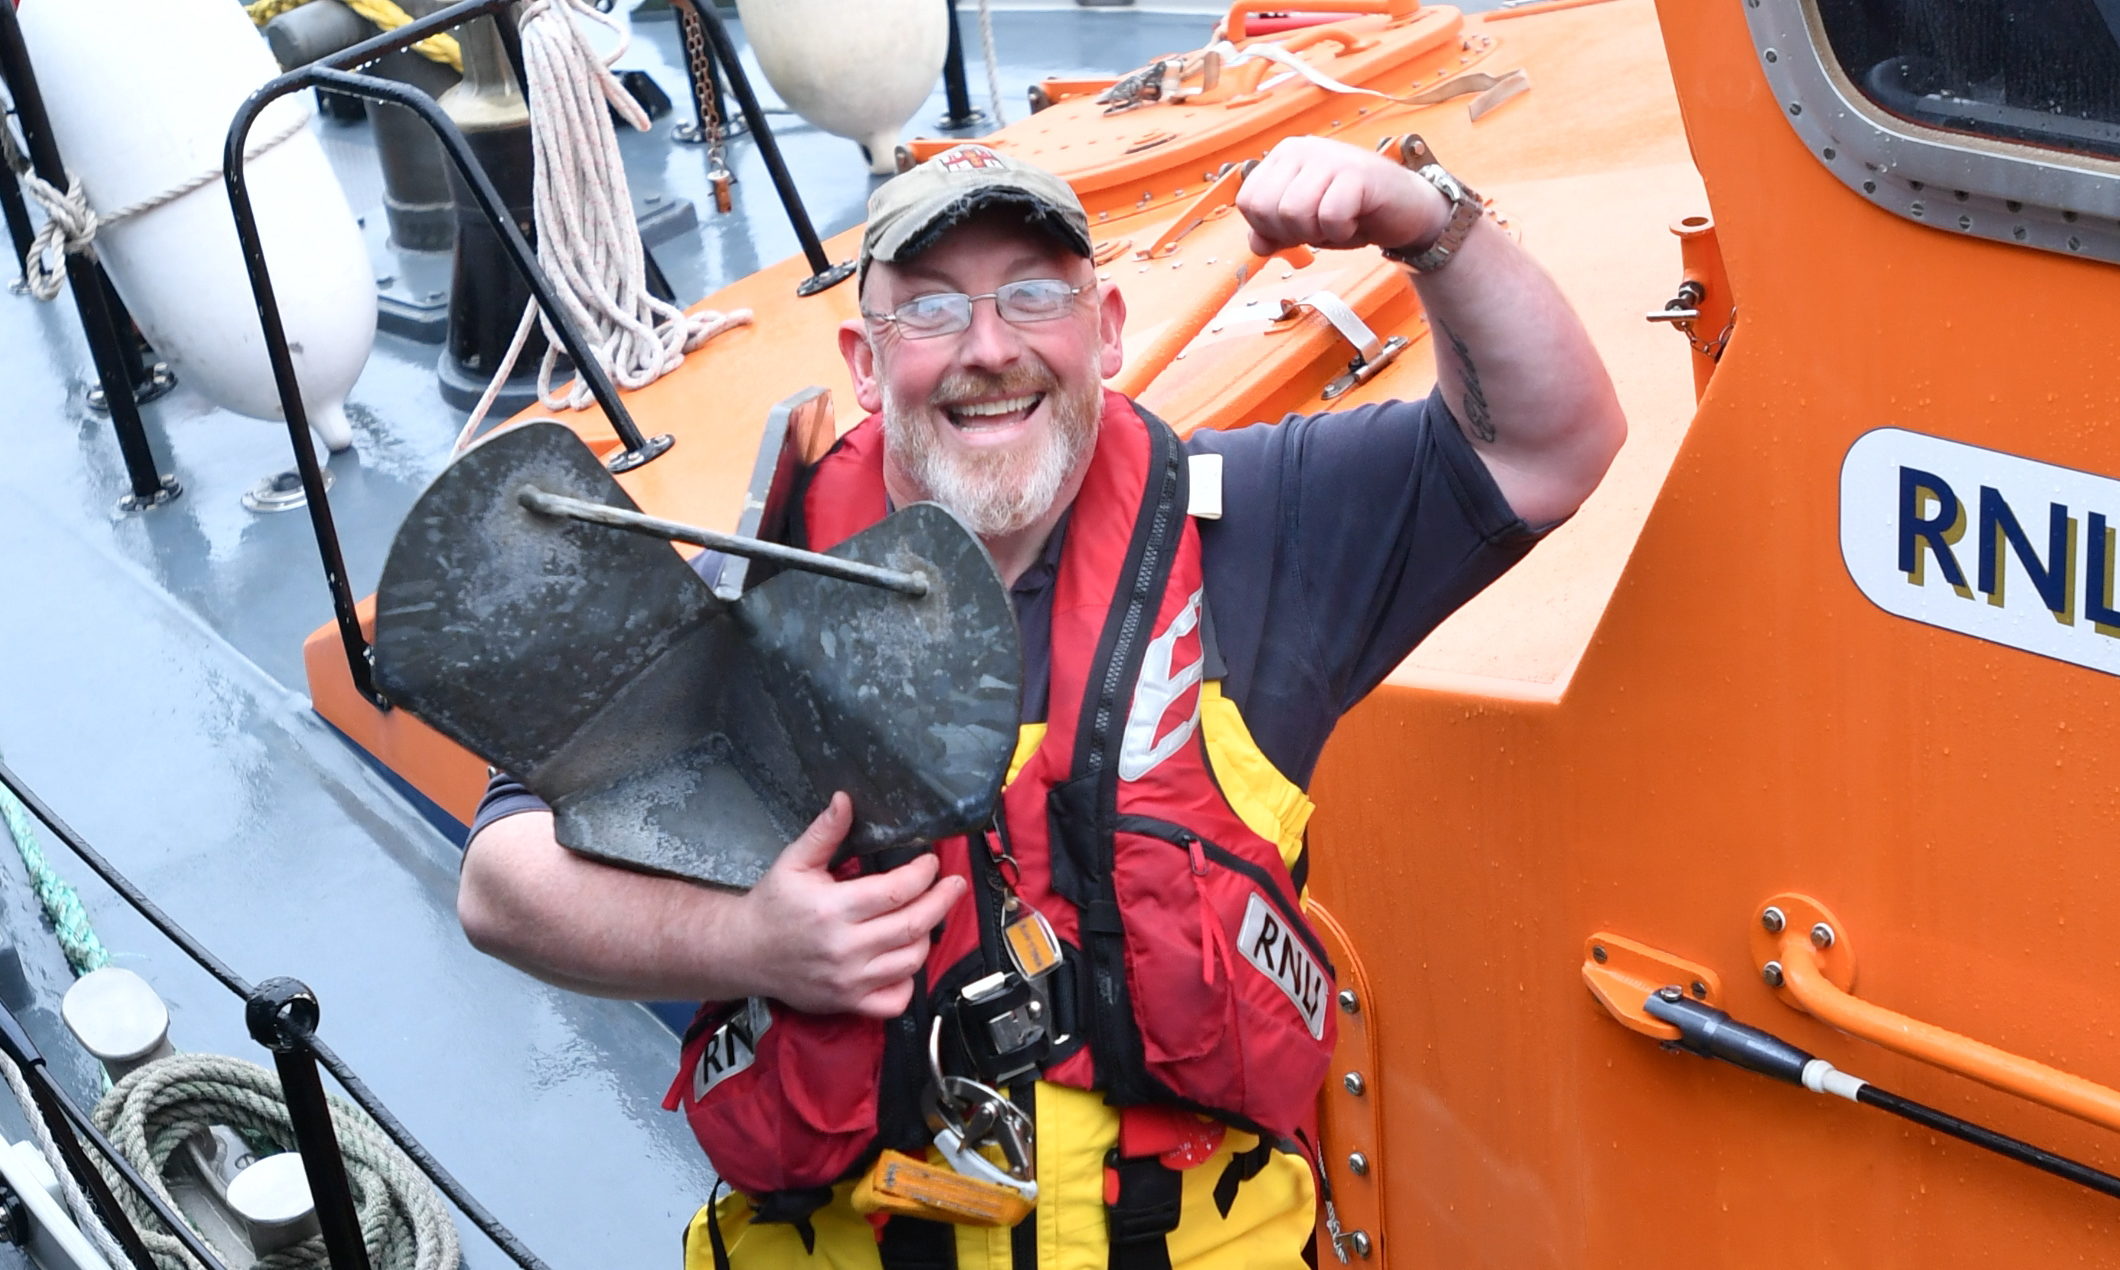 RNLI Fraserburgh Coxswain, Vic Sutherland, getting in practise by lifting a lifeboat anchor.
Picture by Chris Sumner.